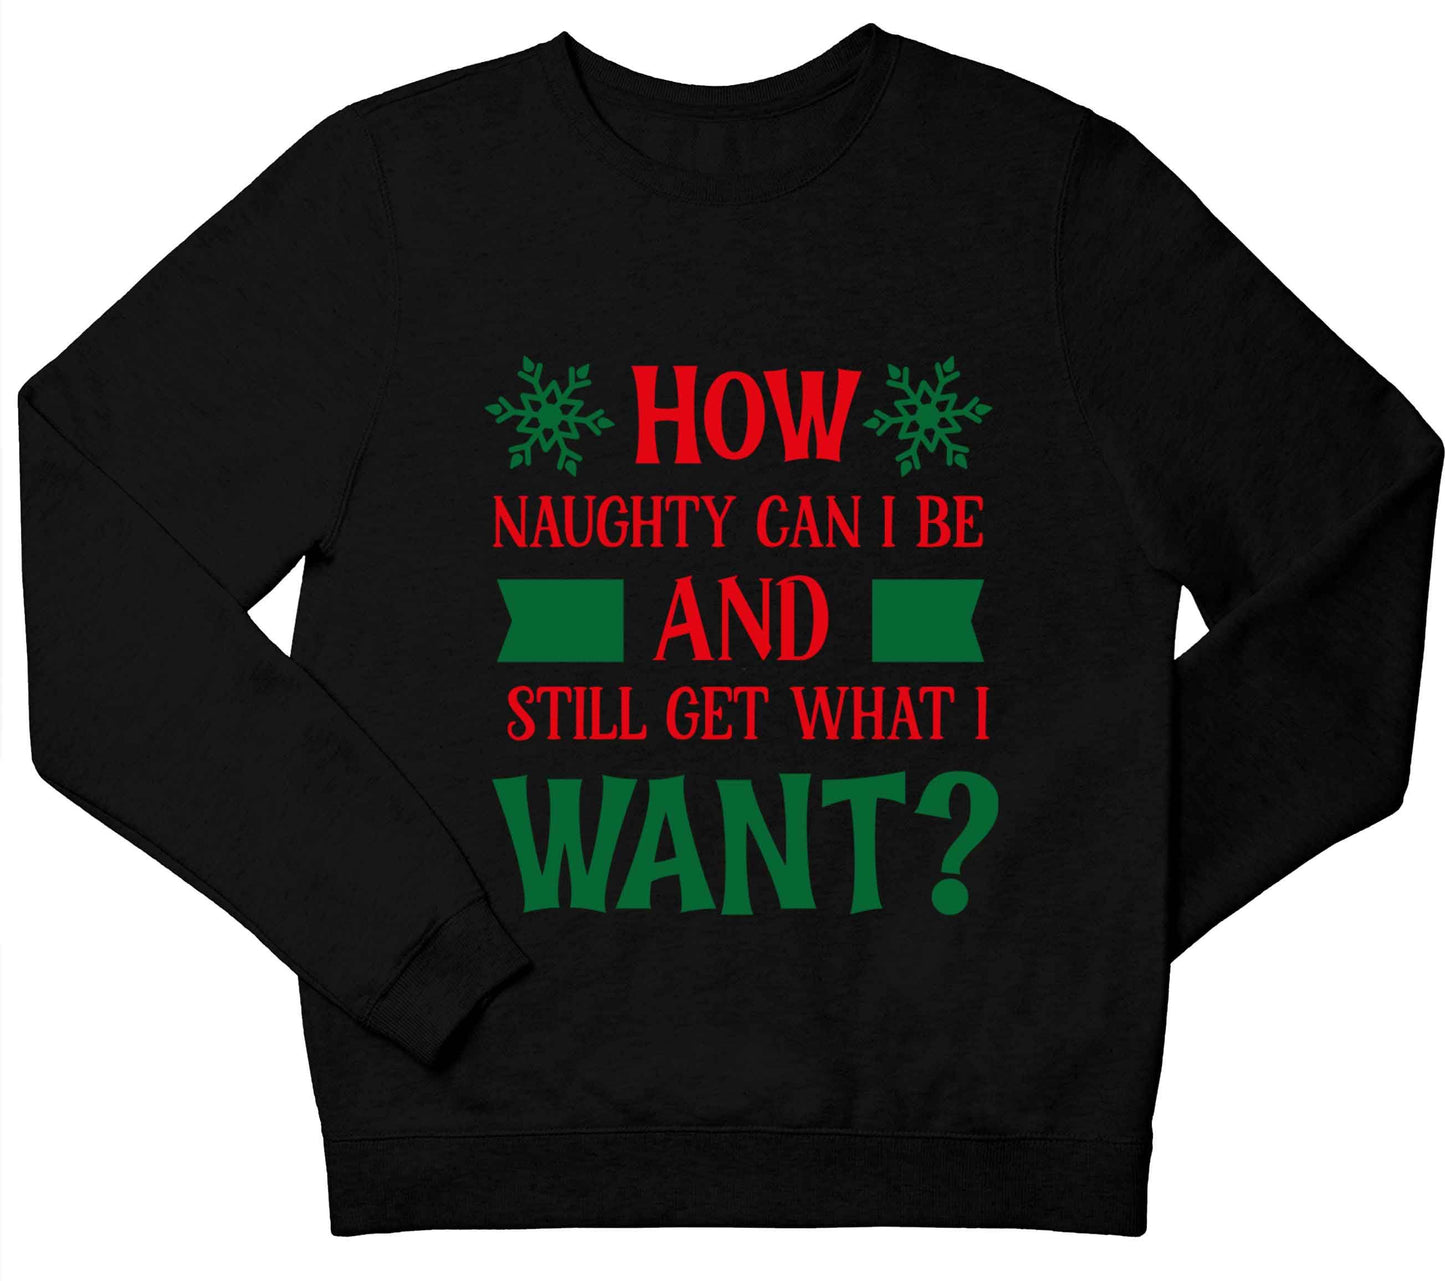 How naughty can I be and still get what I want? children's black sweater 12-13 Years